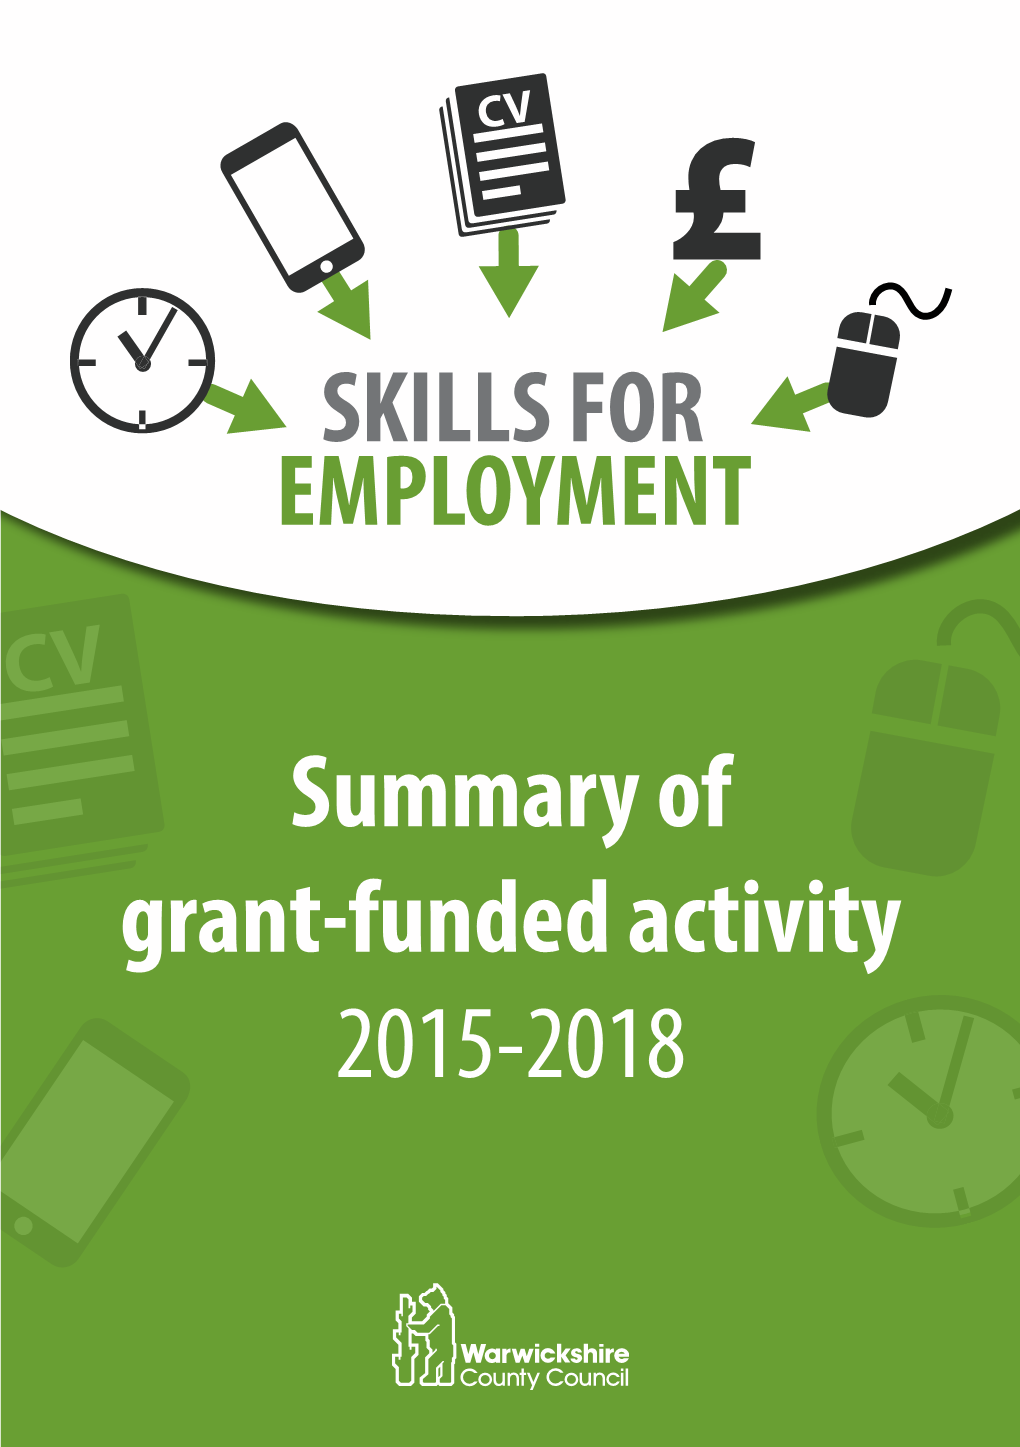 Summary of Grant-Funded Activity 2015-2018